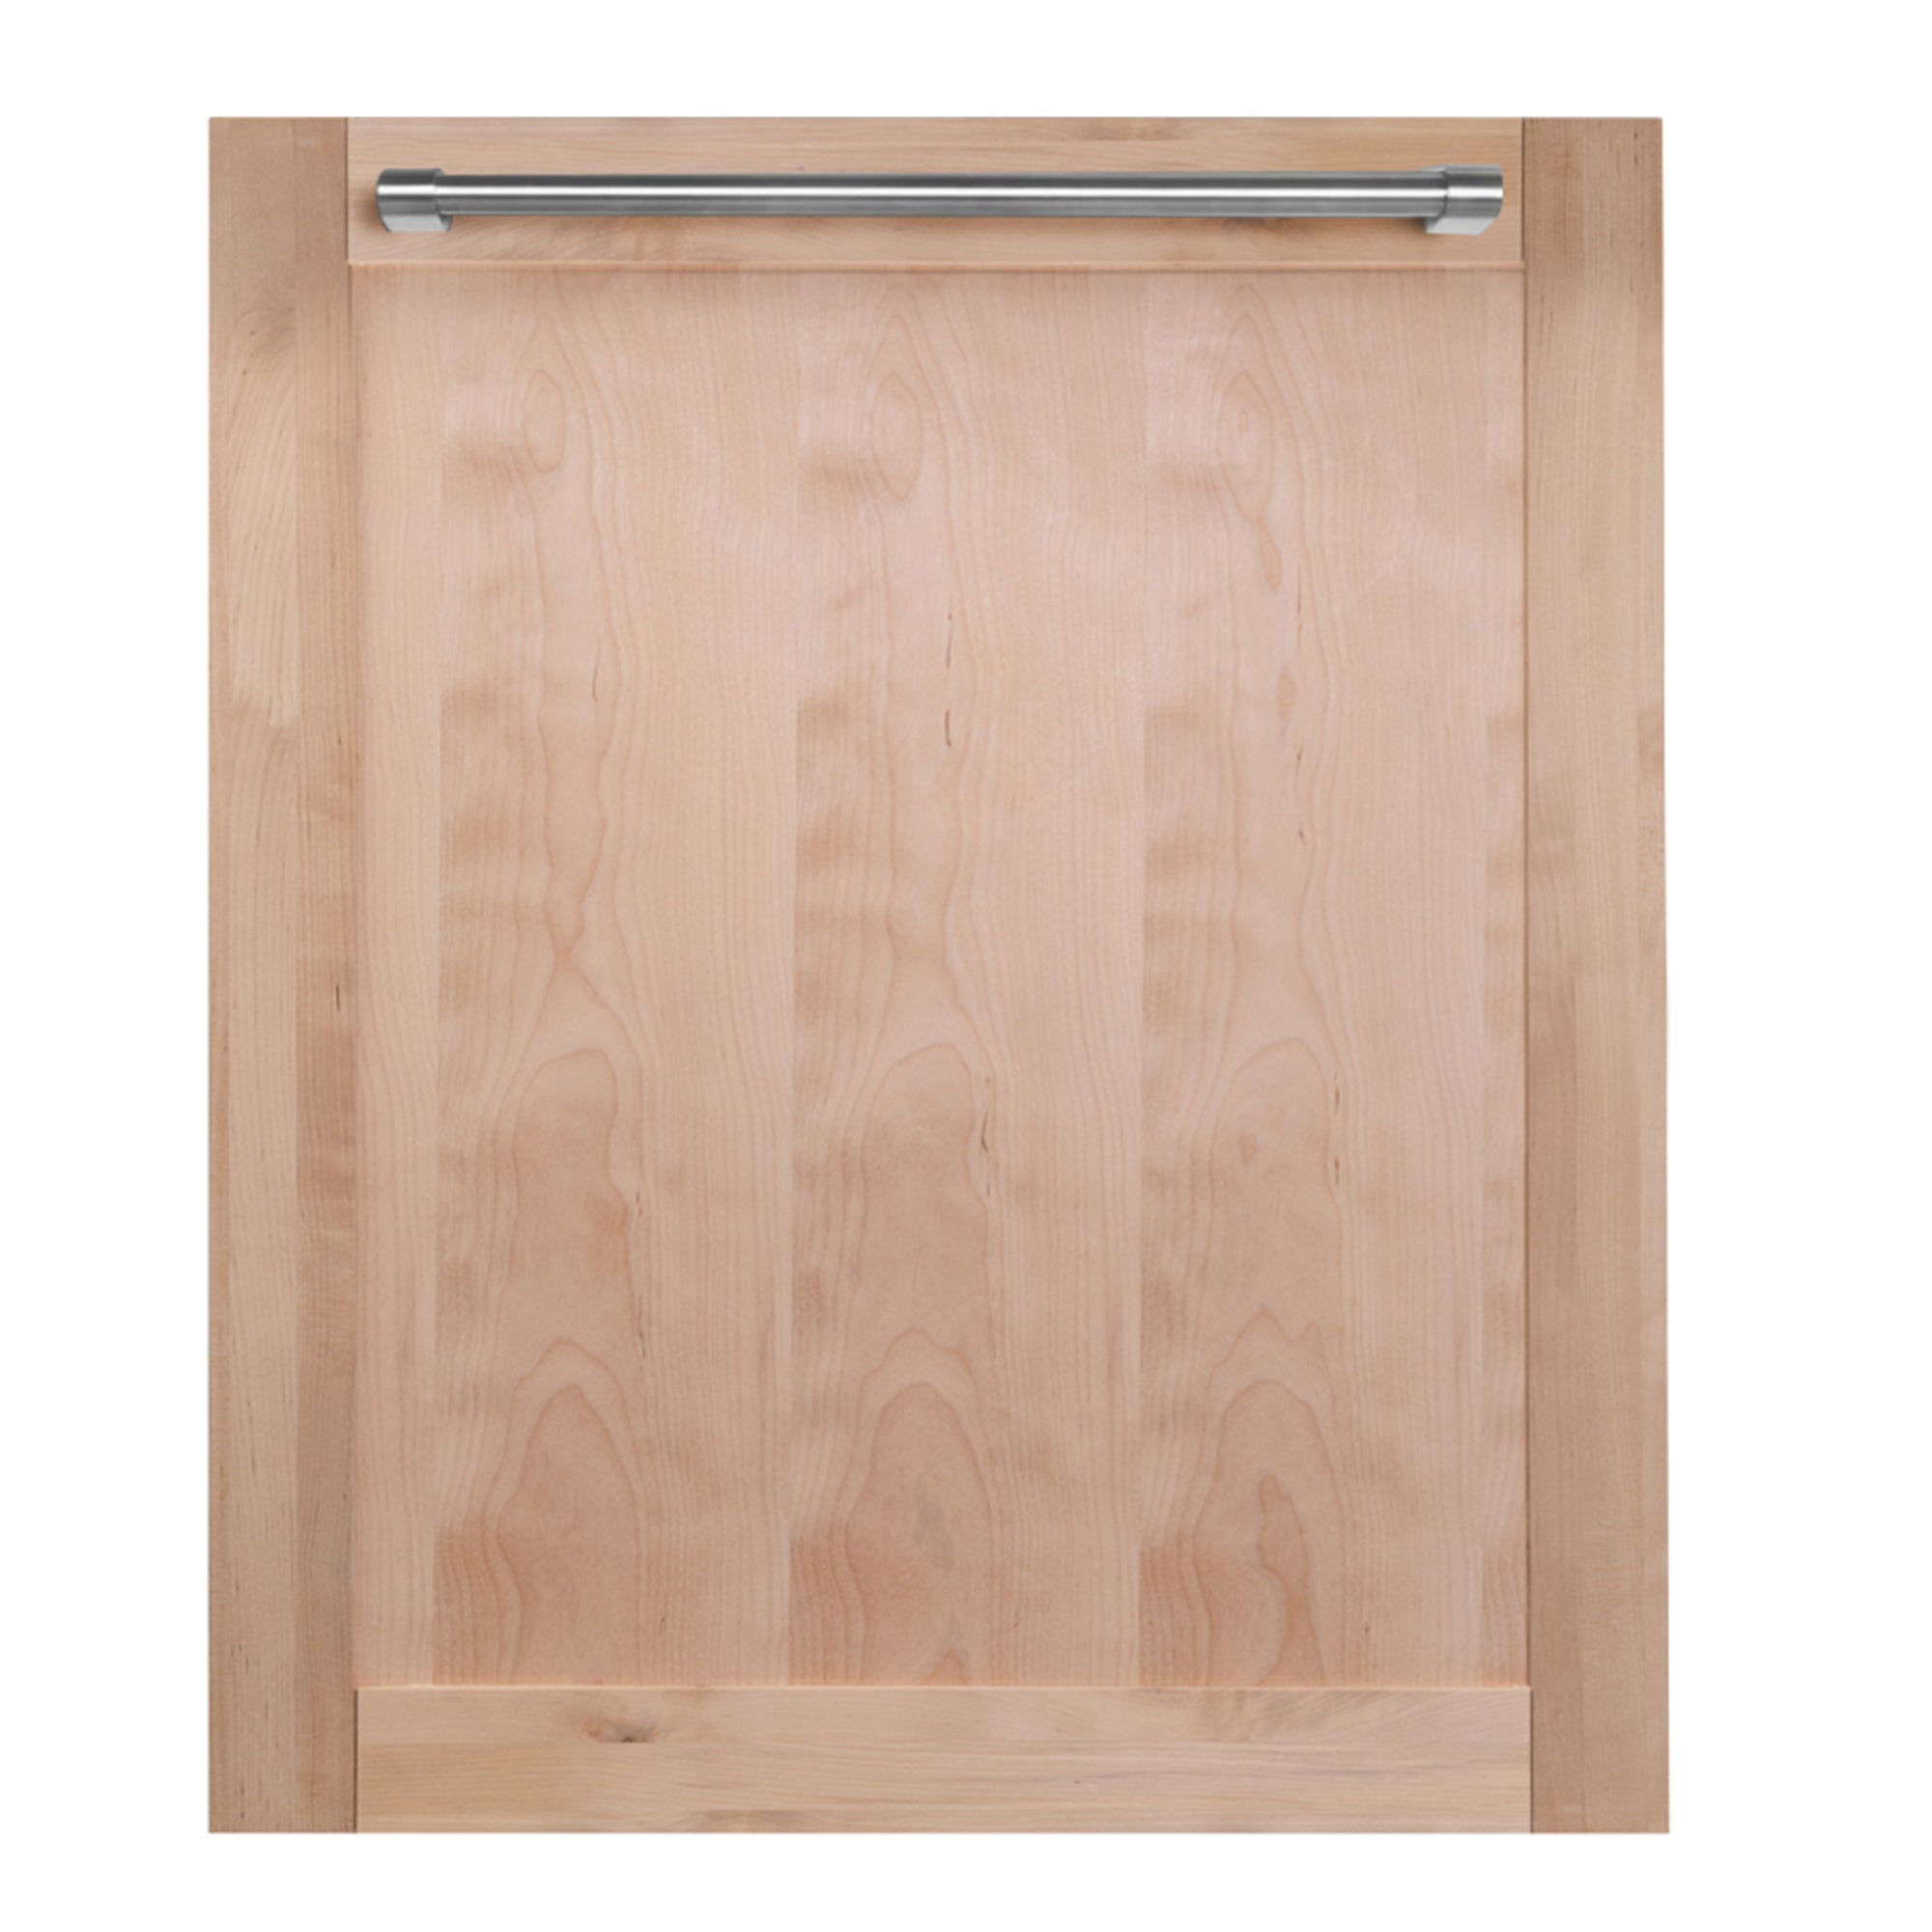 ZLINE 24" Dishwasher Panel in Unfinished Wood with Traditional Handle (DP-UF-H-24)